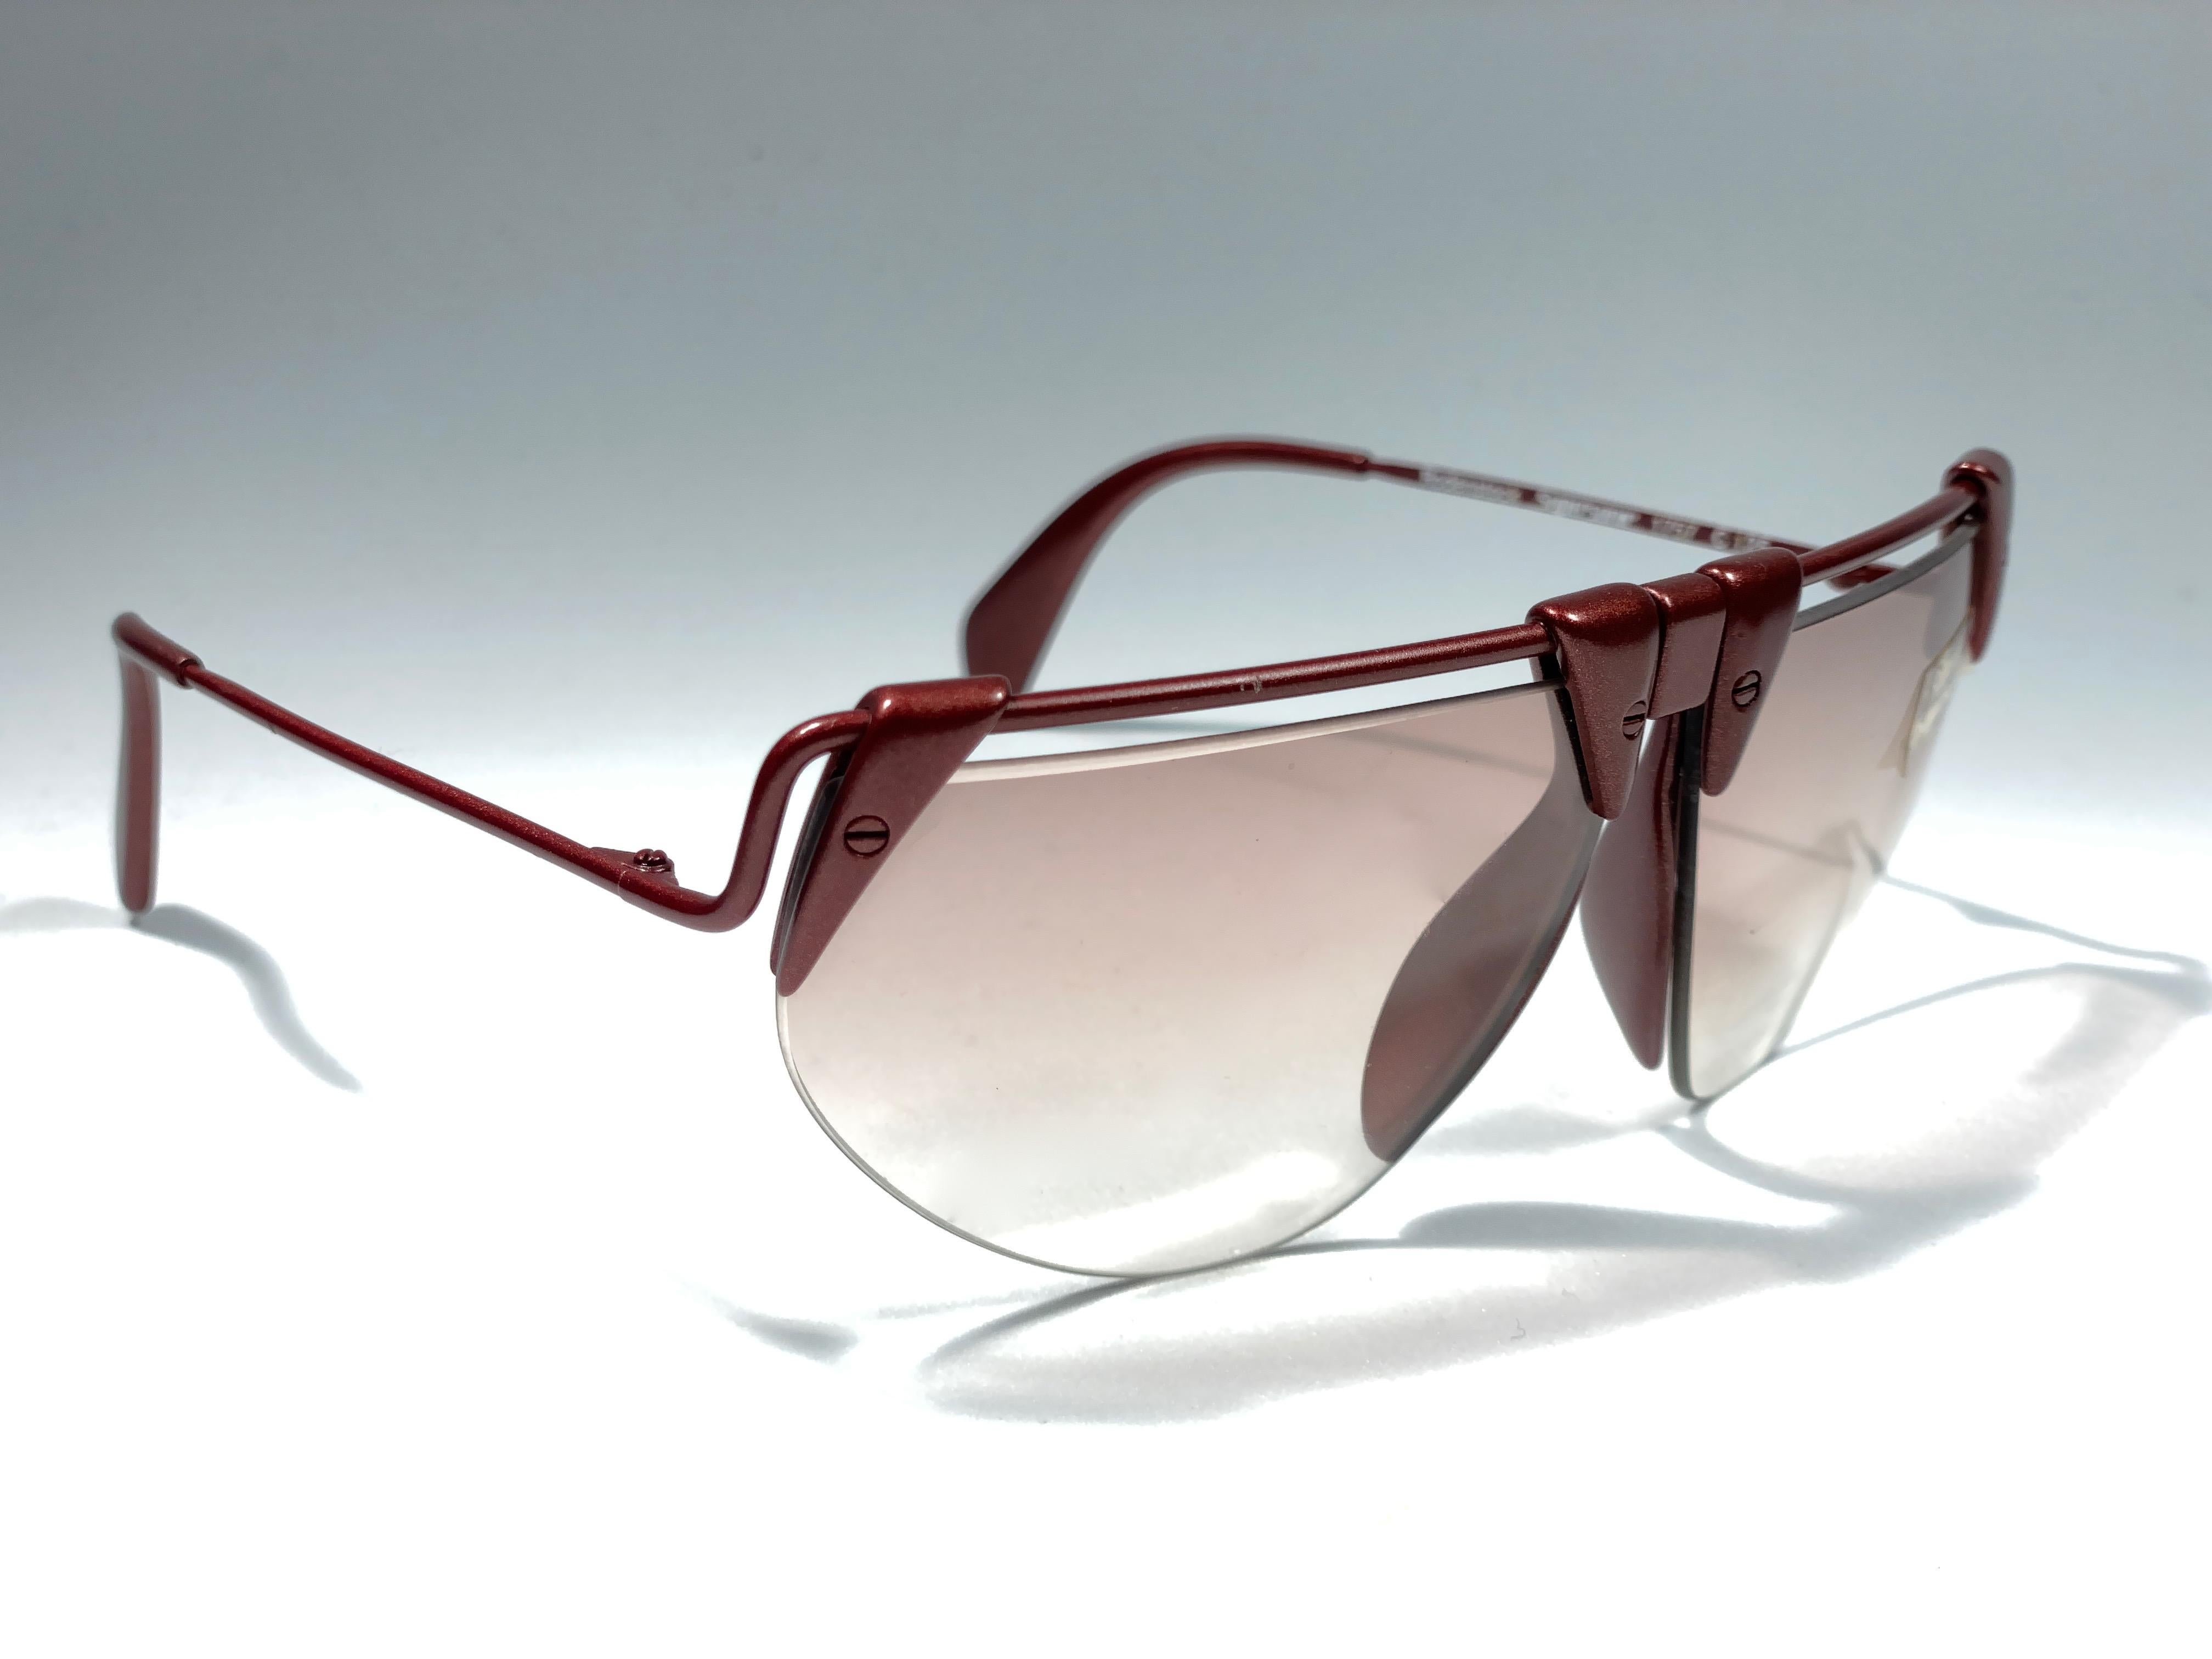 New Vintage Rodenstock sunglasses.  

Metallic Burgundy accents frame sporting a pair light gradient lenses.  Never worn or displayed. 
This item show minor sign of wear due to nearly 40 years of storage.  Designed and produced in Germany.